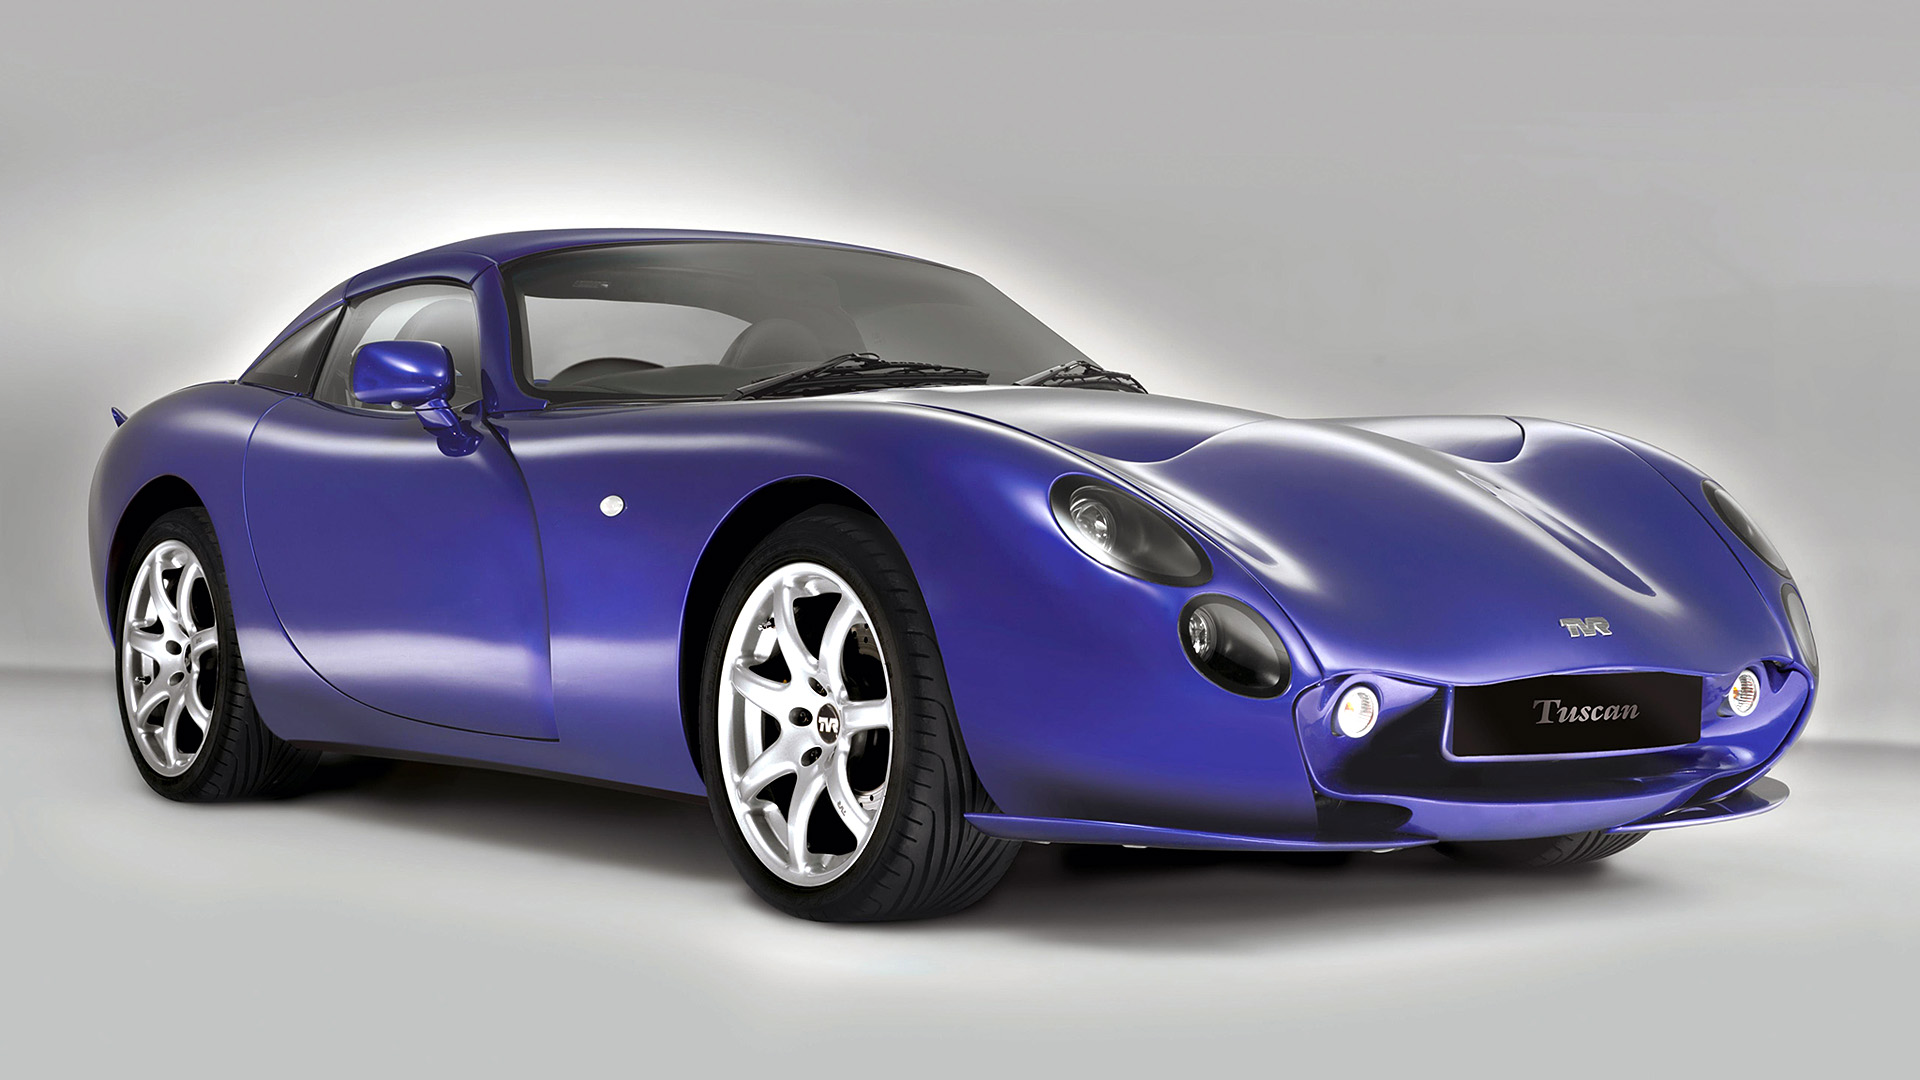  2006 TVR Tuscan S Wallpaper.